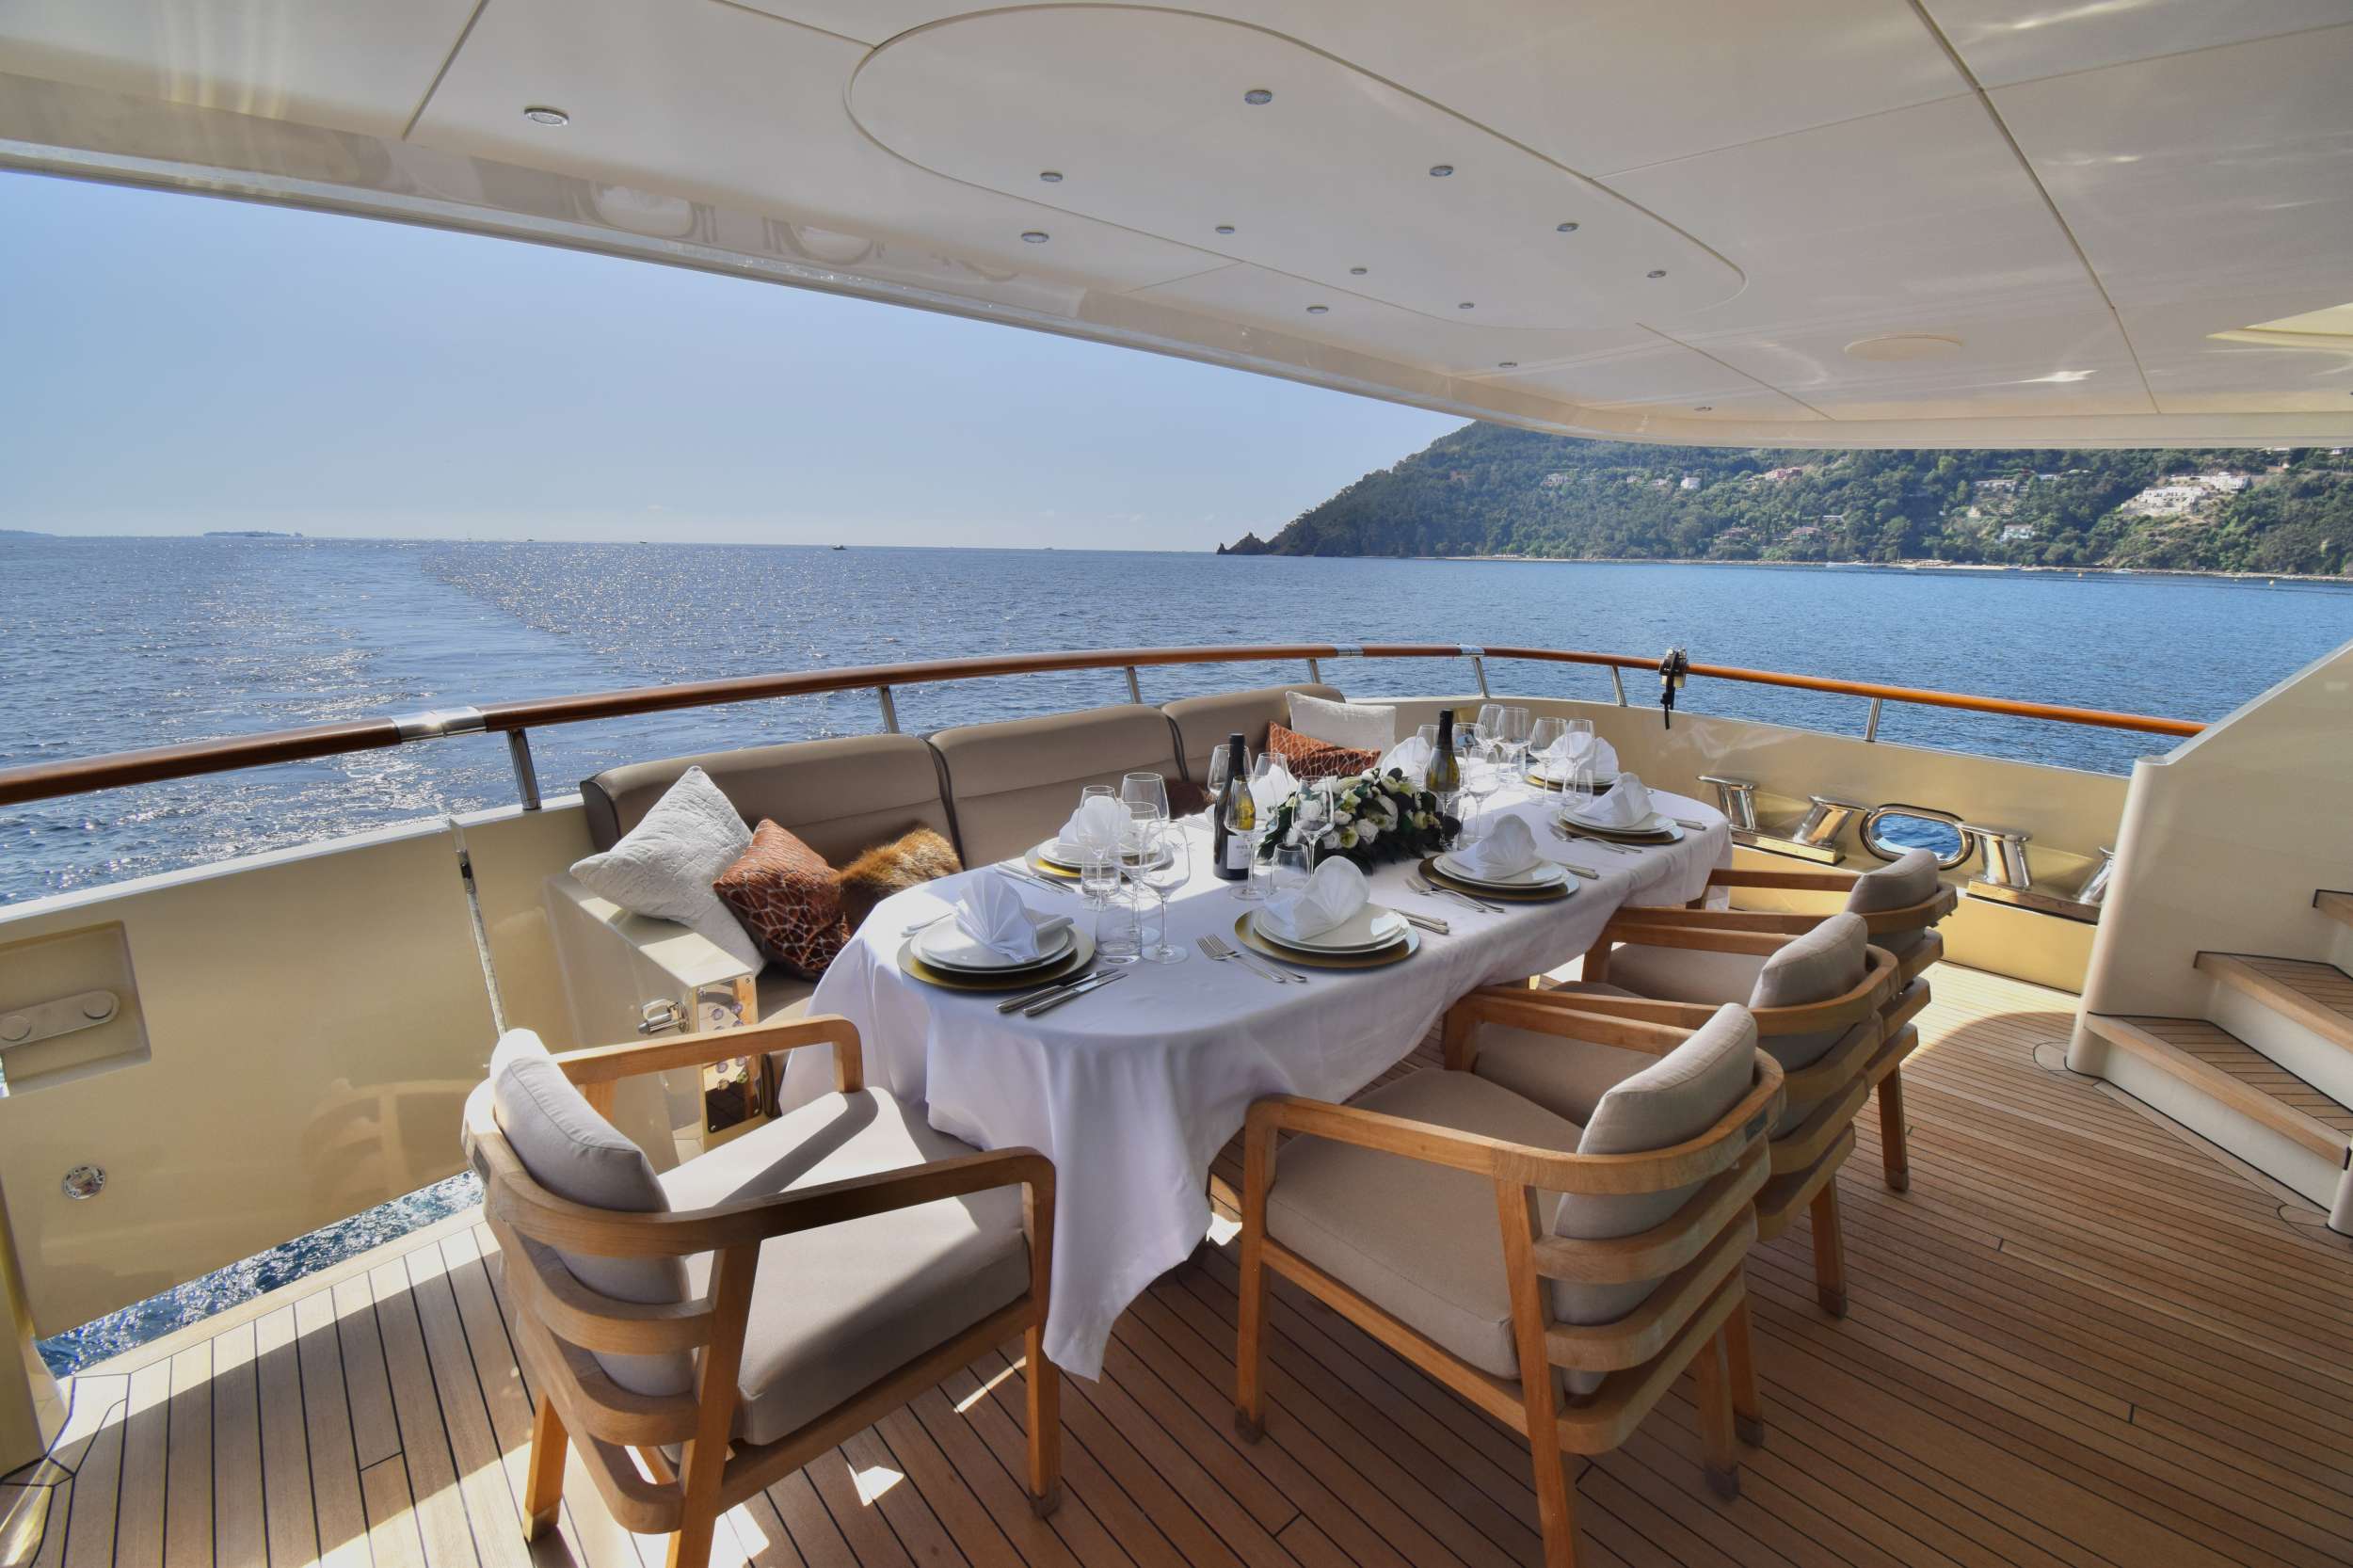 ORIZZONTE - Yacht Charter Murcia & Boat hire in W. Med -Naples/Sicily, W. Med -Riviera/Cors/Sard., W. Med - Spain/Balearics 3